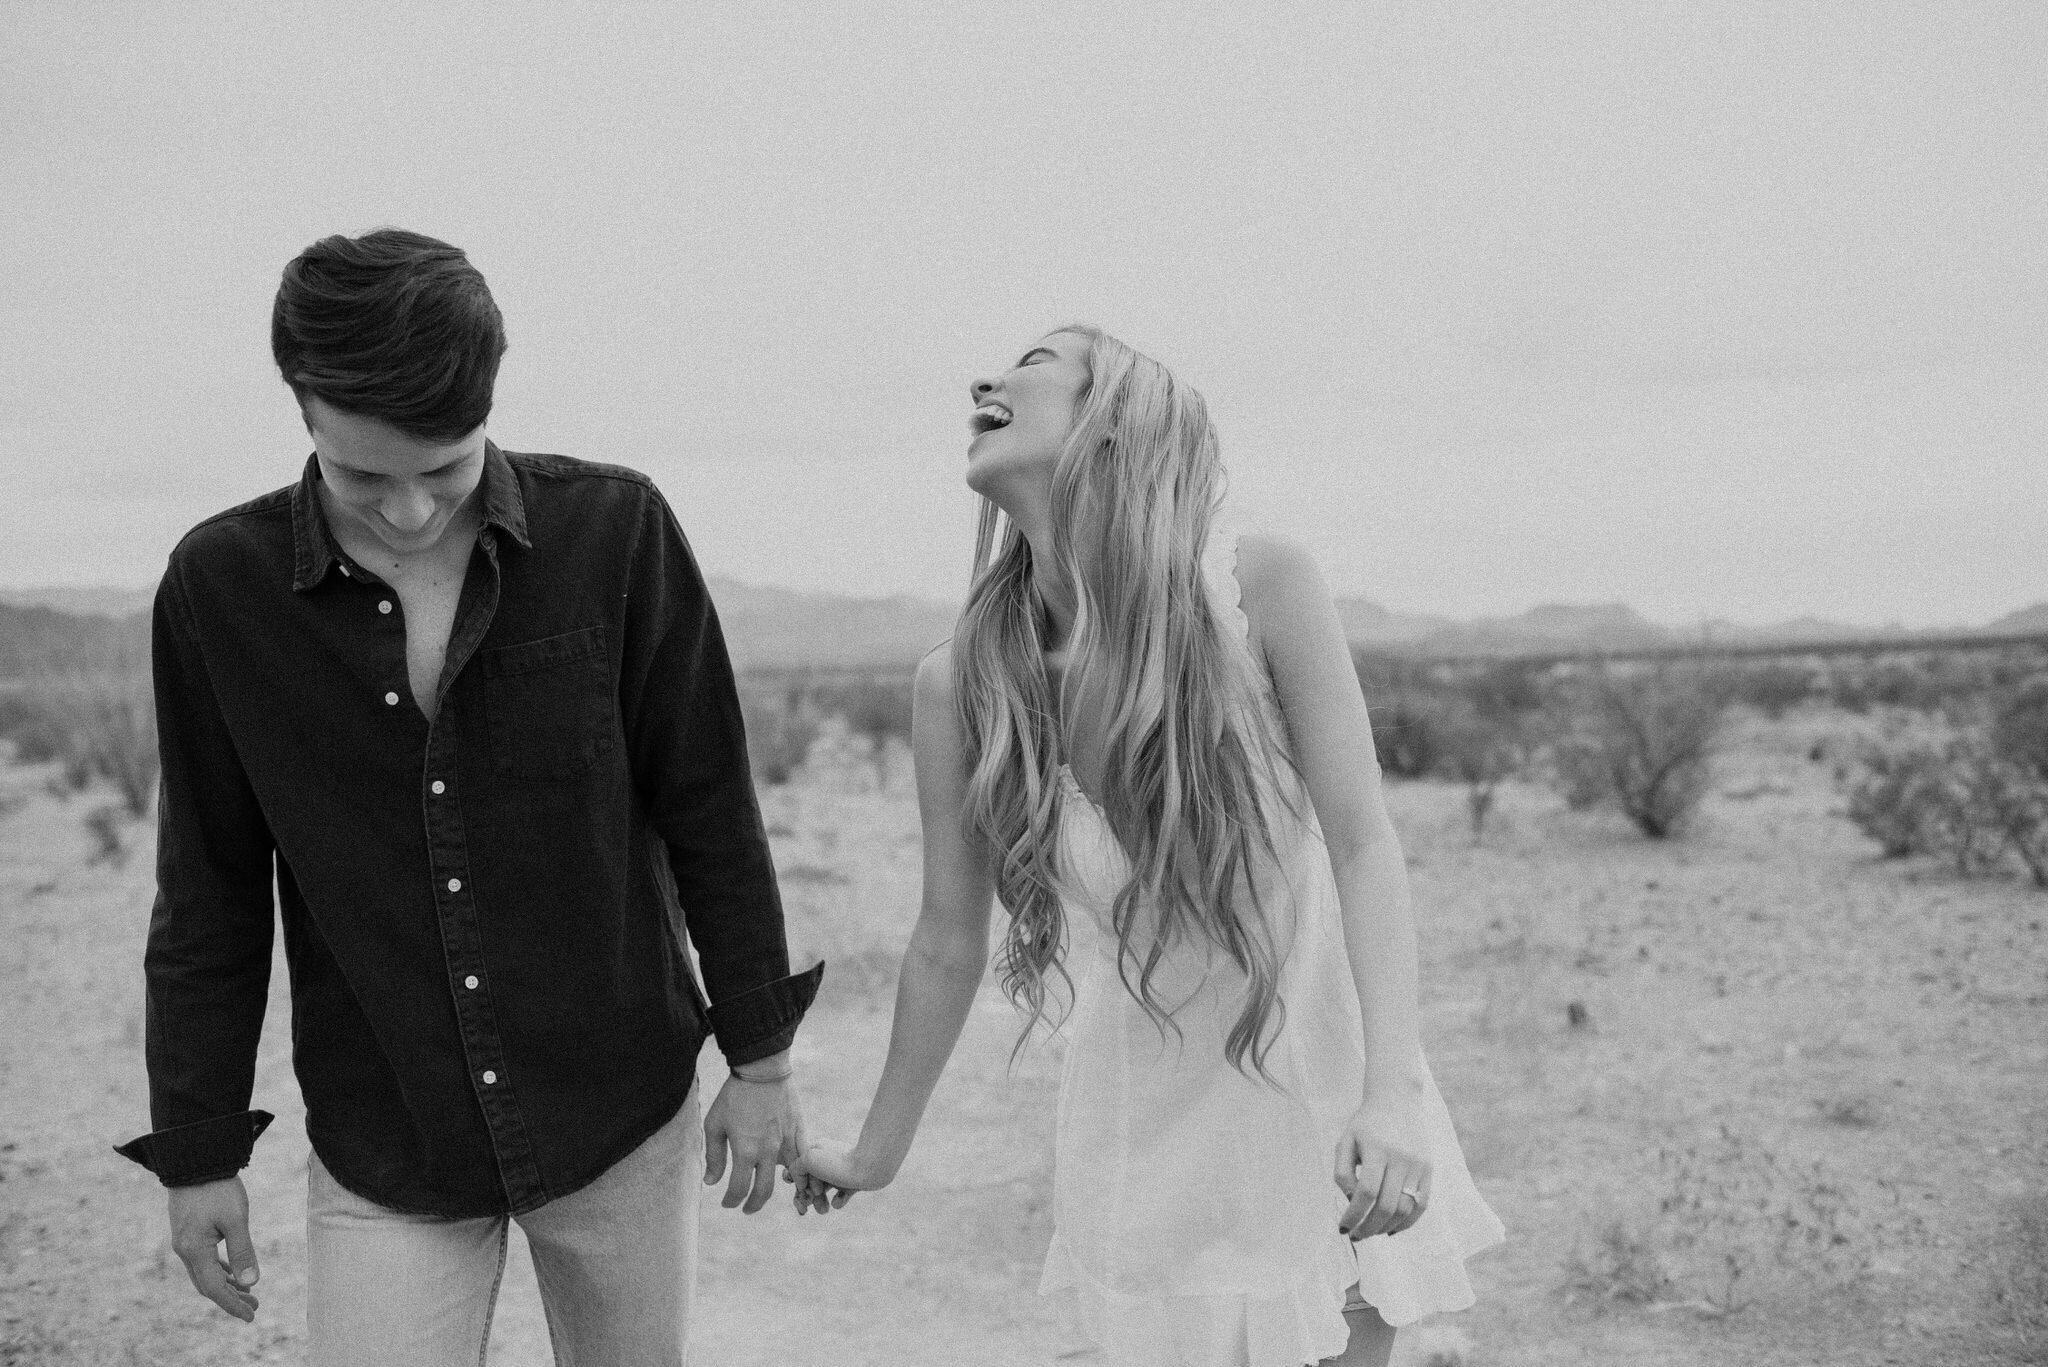 Kaylie-Sirek-Photography-Big-Bend-National-Park-Texas-Engagement-Session-Styled-You-032.jpg